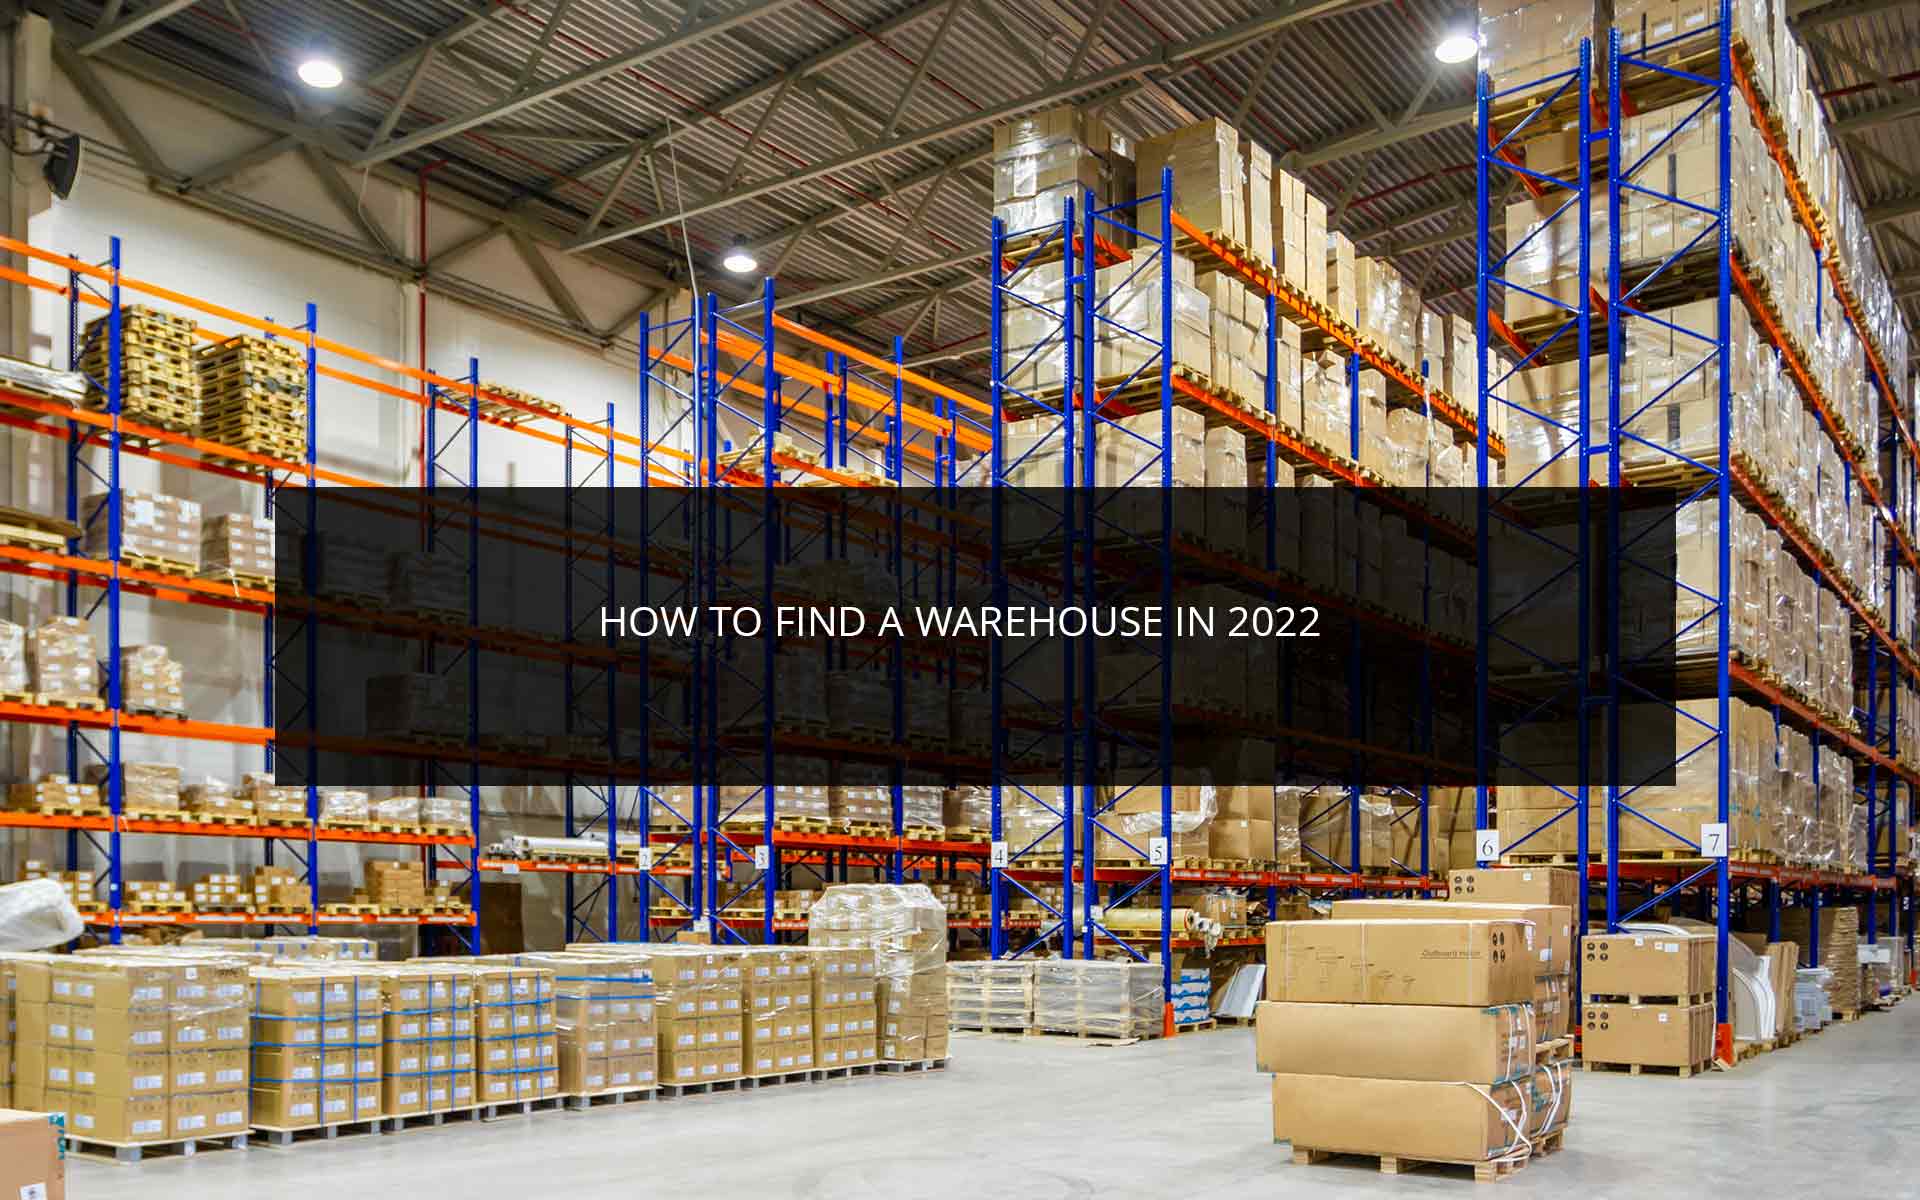 How to Find a Warehouse in 2022 | Phoenix 3PL